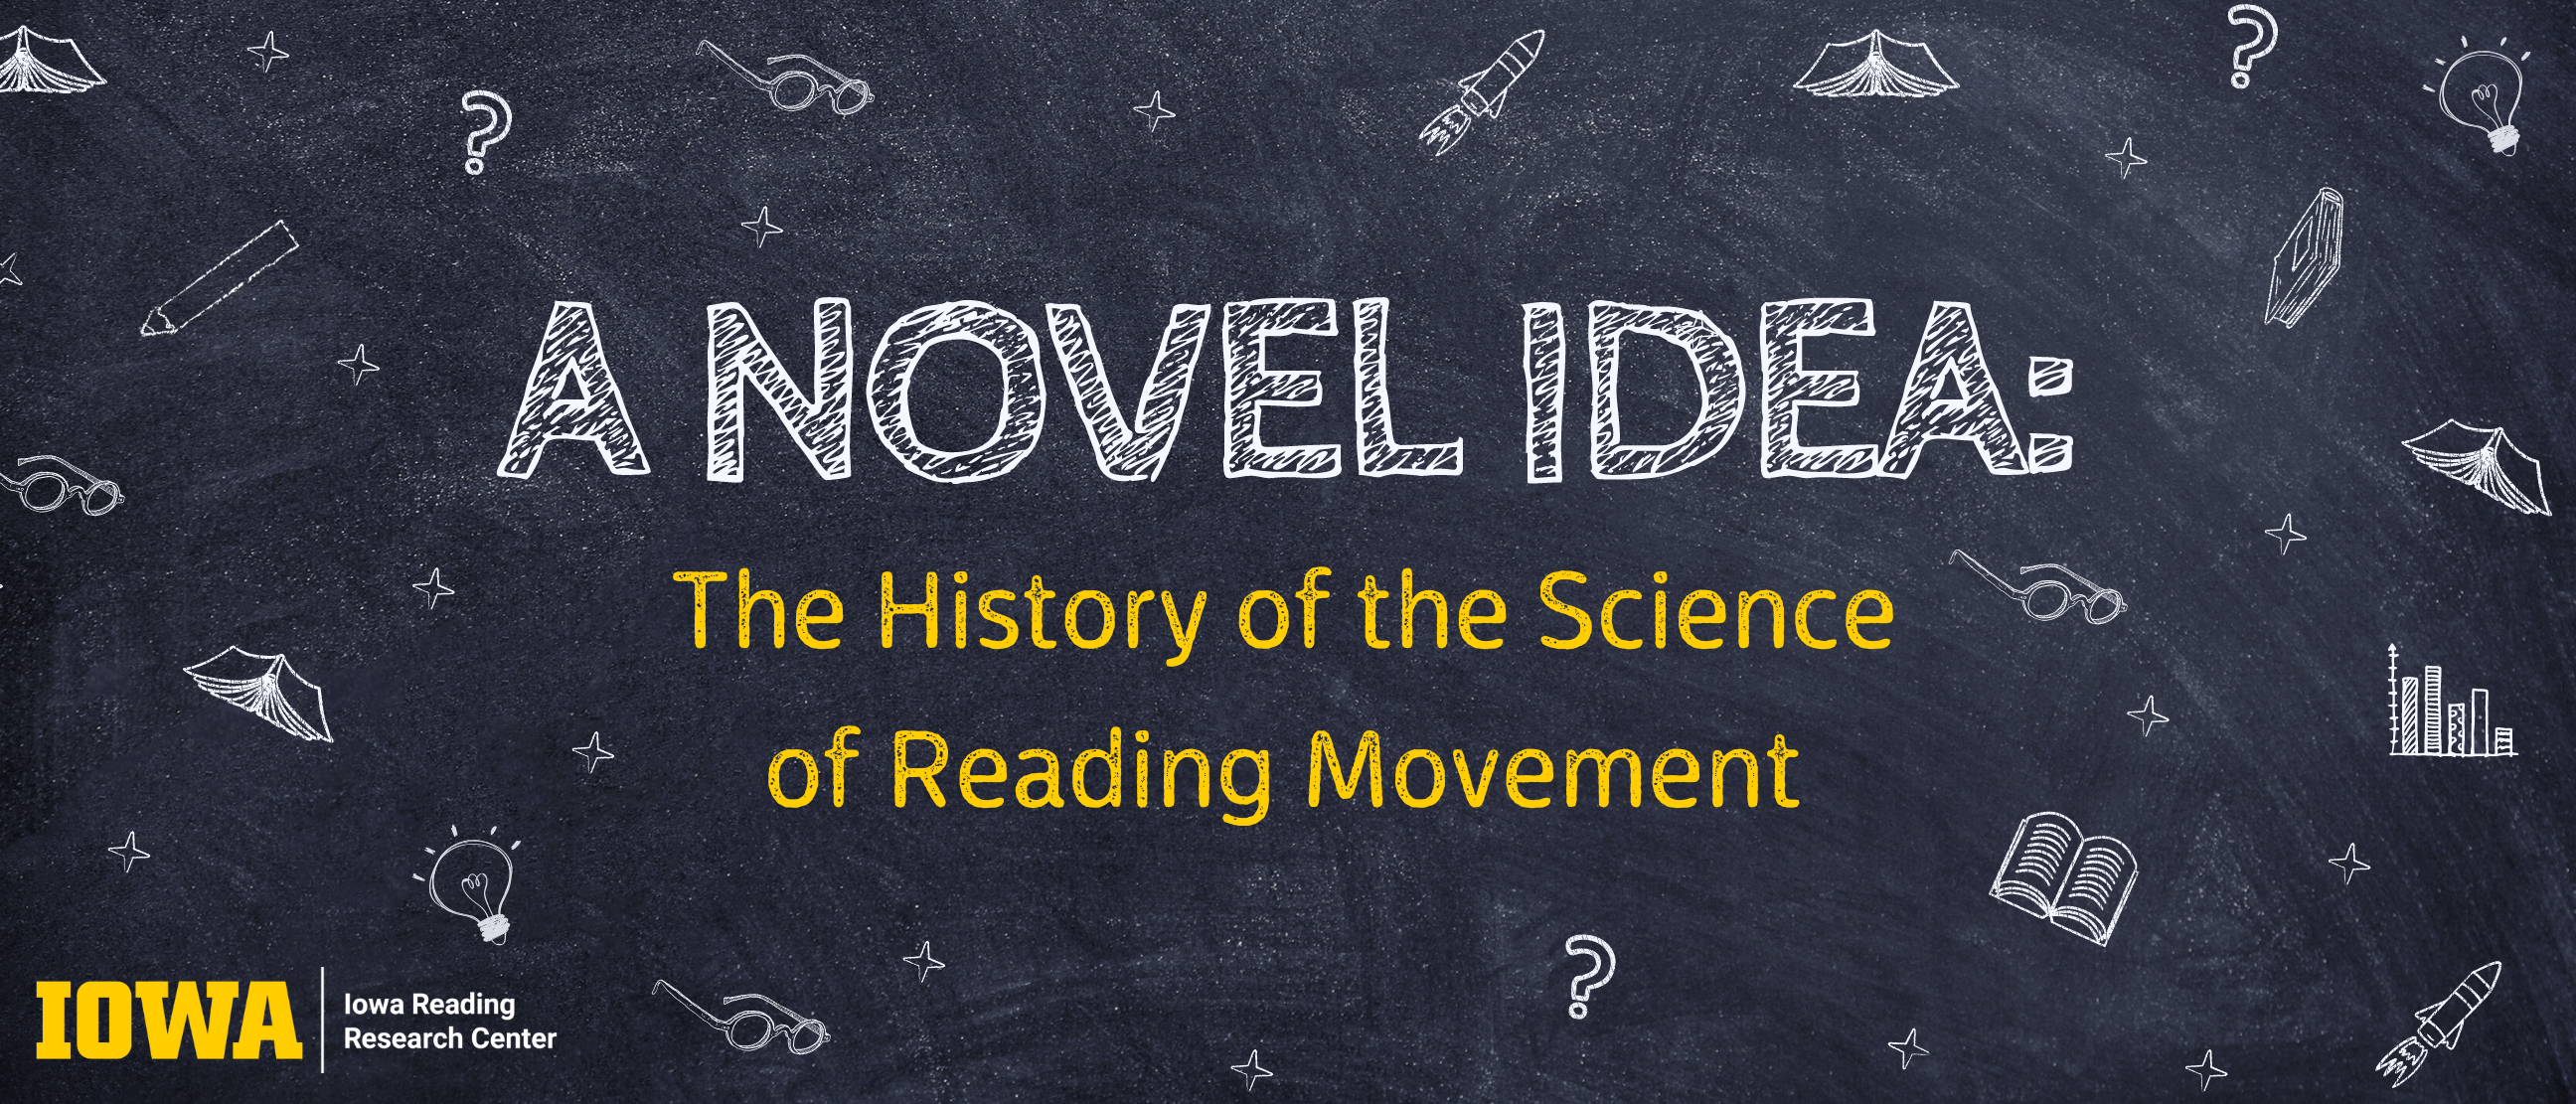 Chalkboard banner that reads "A Novel Idea: The History of the Science of Reading Movement".